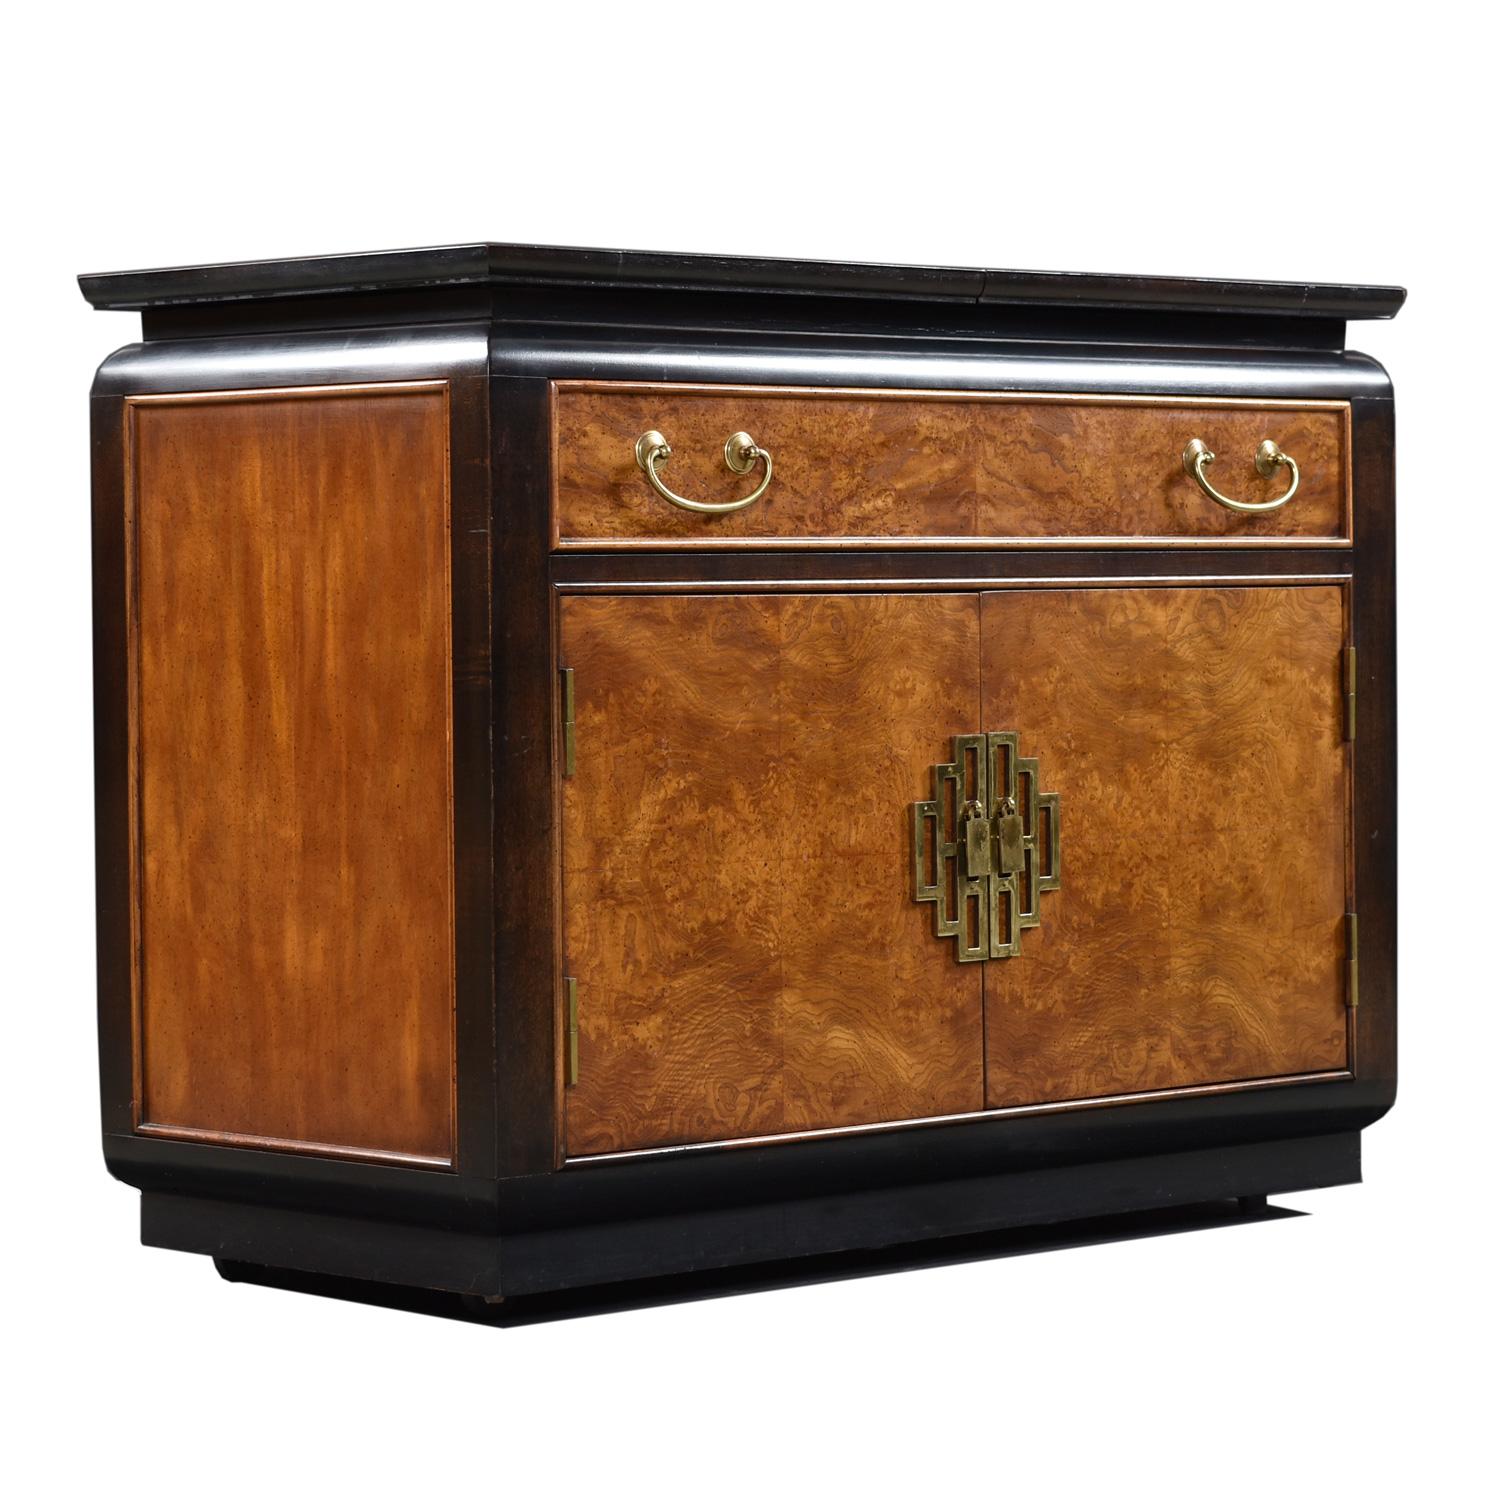 Dorothy Draper style campaign server bar cart on casters made by esteemed US furniture maker Century circa 1970s. Old growth flaxen flared grain olive burl from top to bottom, front and back. Beautifully finished on all four sides. Black lacquer